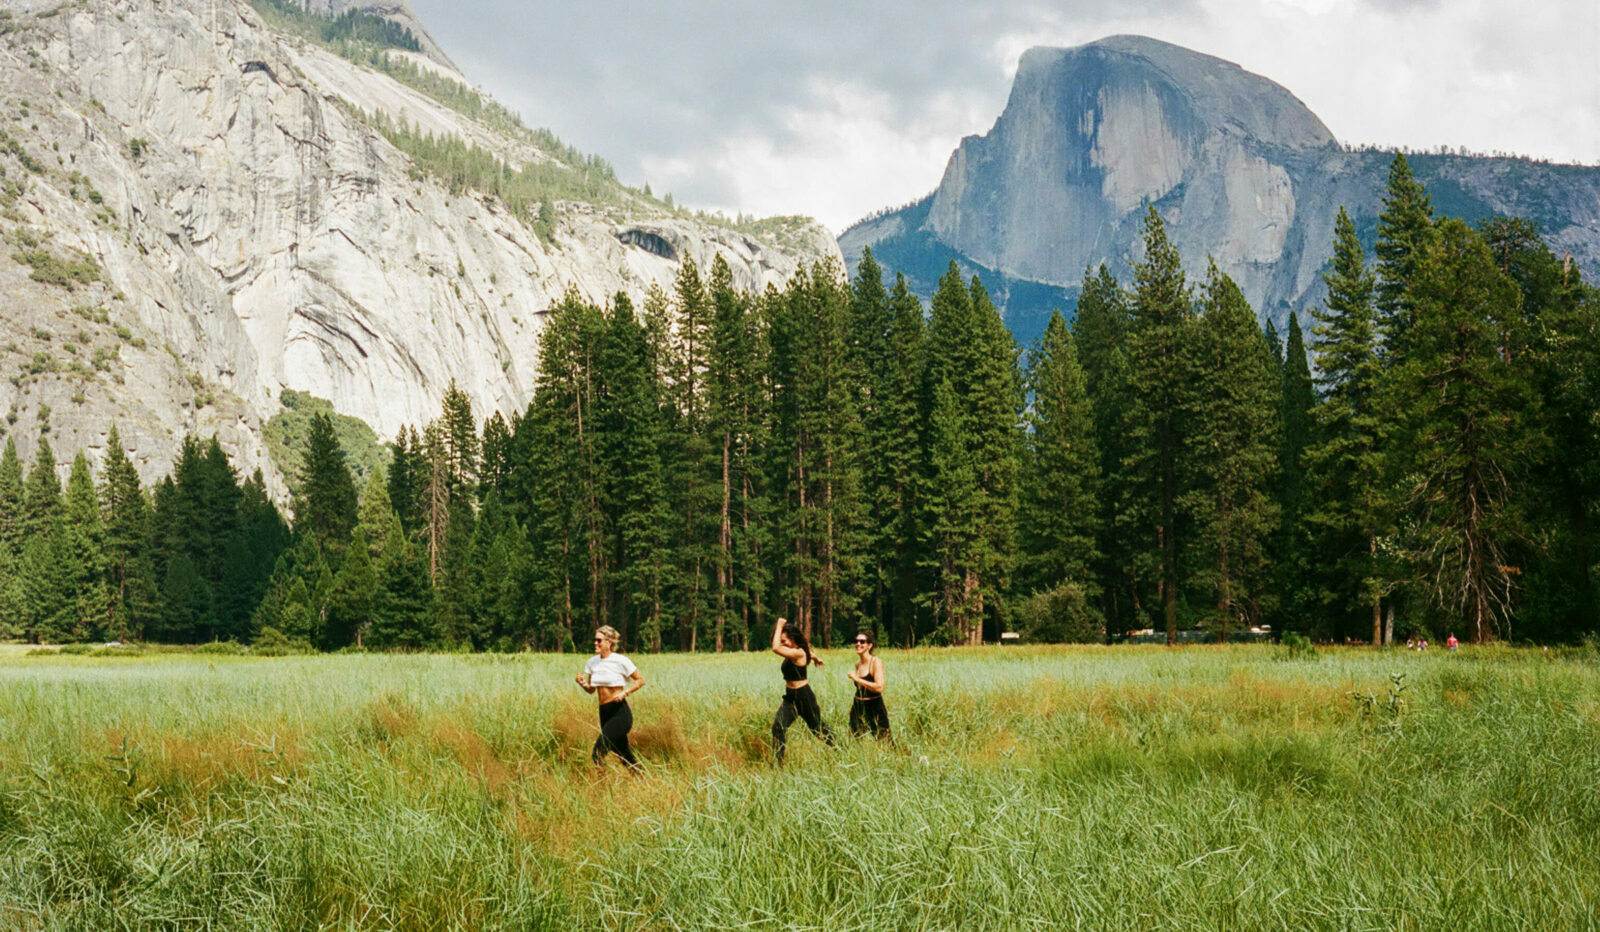 Three girls run in a grassy field, enjoying a scenic view of tall trees and mountains.